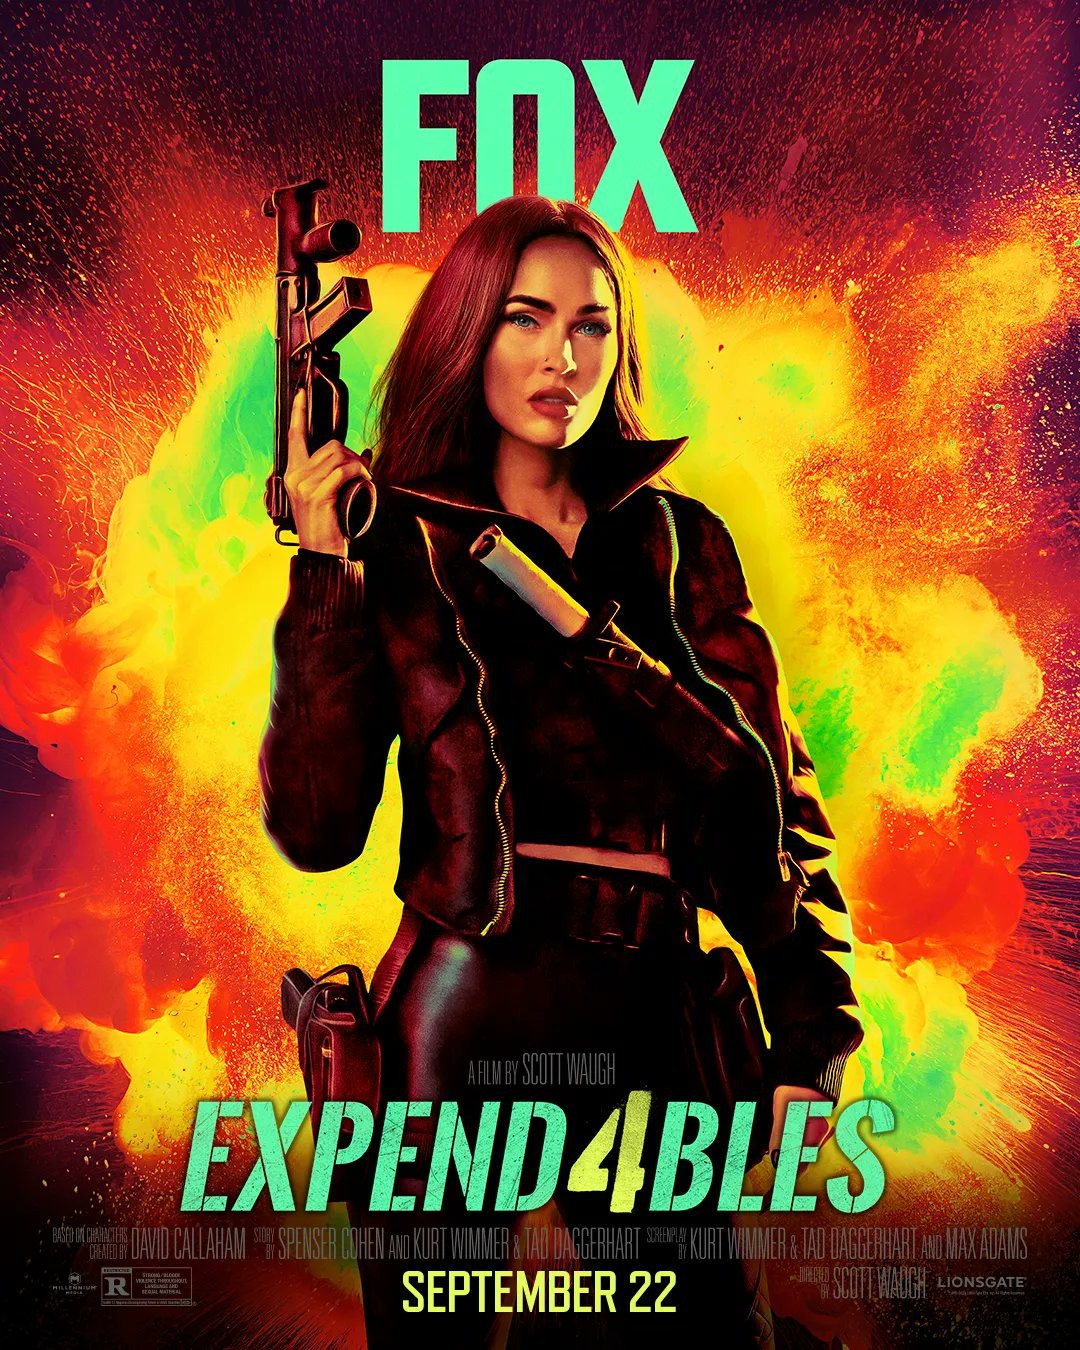 Megan Fox as Gina in Expend4bles.